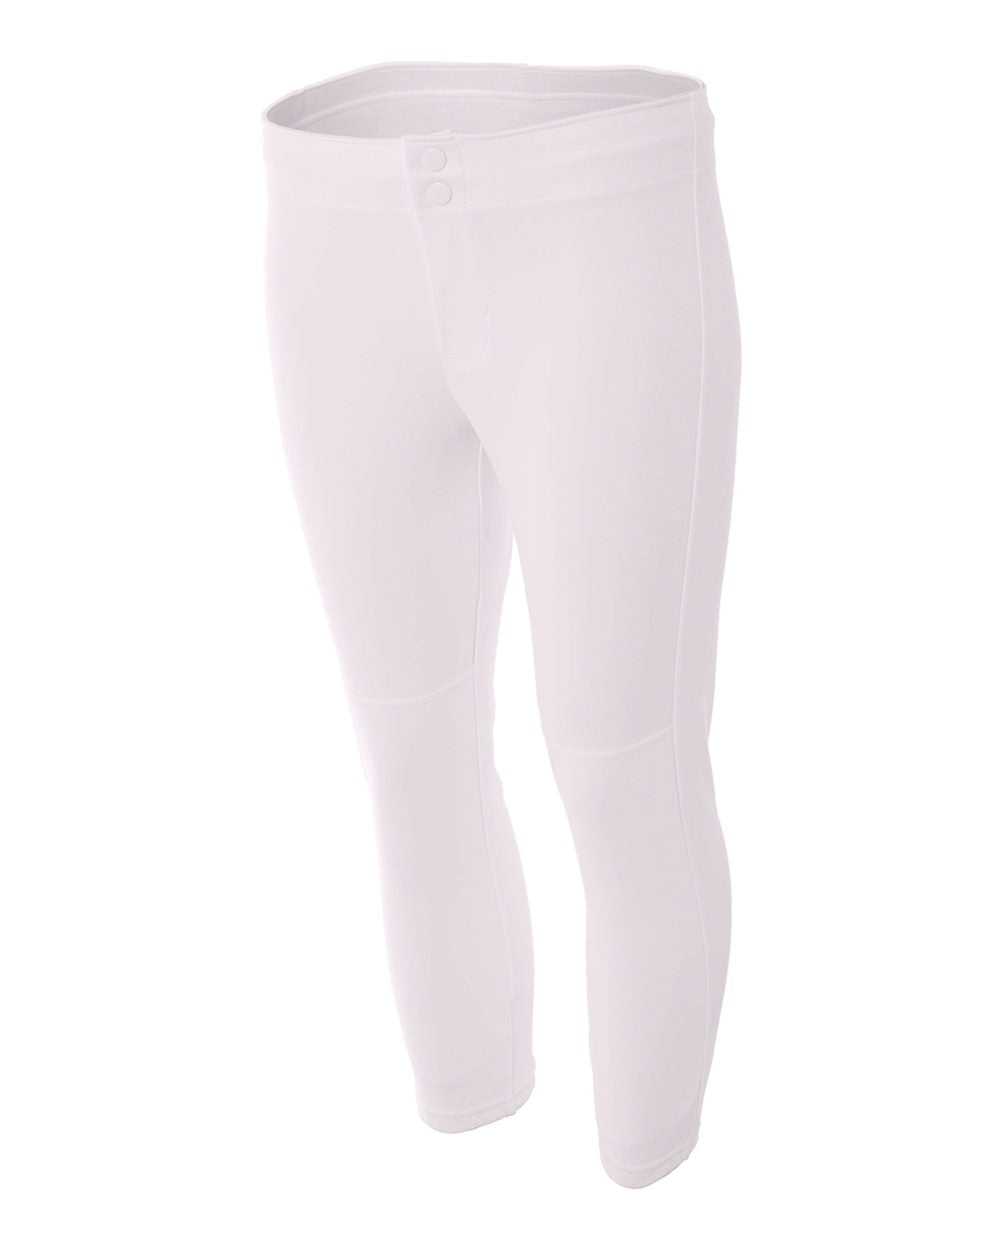 A4 NW6166 Woman's Softball Pant - White - HIT a Double